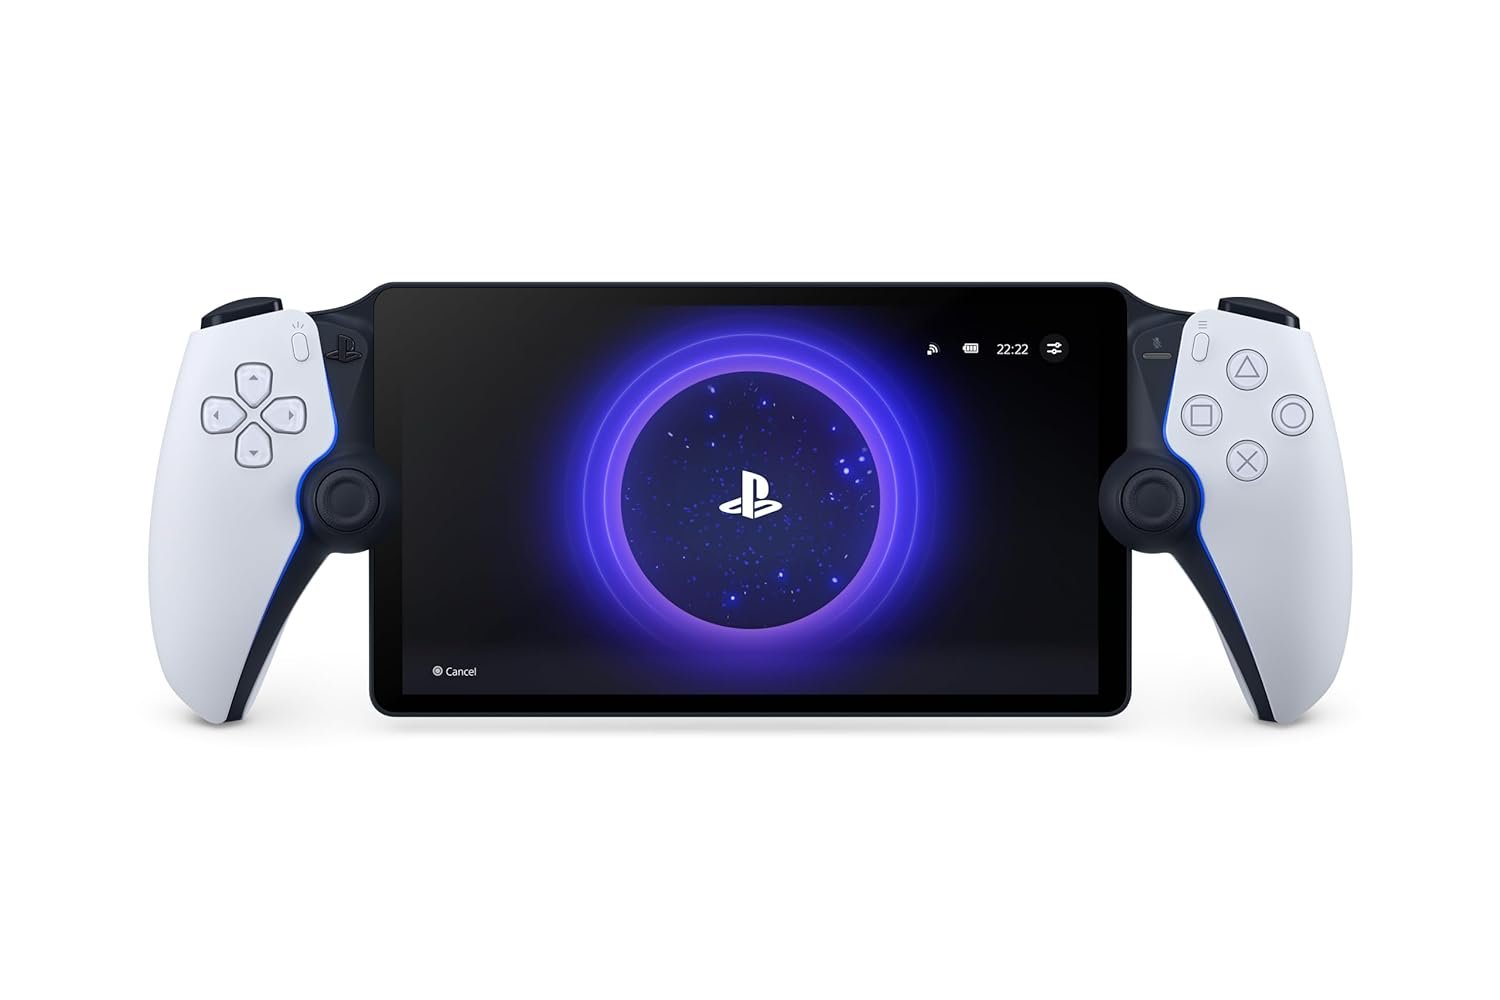 Matt Swider (once-a-day tech deals @ The Shortcut) on X: "🚨🚨🔗LINKS: If  you want PlayStation Portal, keep an eye on these 2 links. I keep seeing  add-to-cart buttons 🌟1. Walmart https://t.co/q19XXq5hf1 📦2.